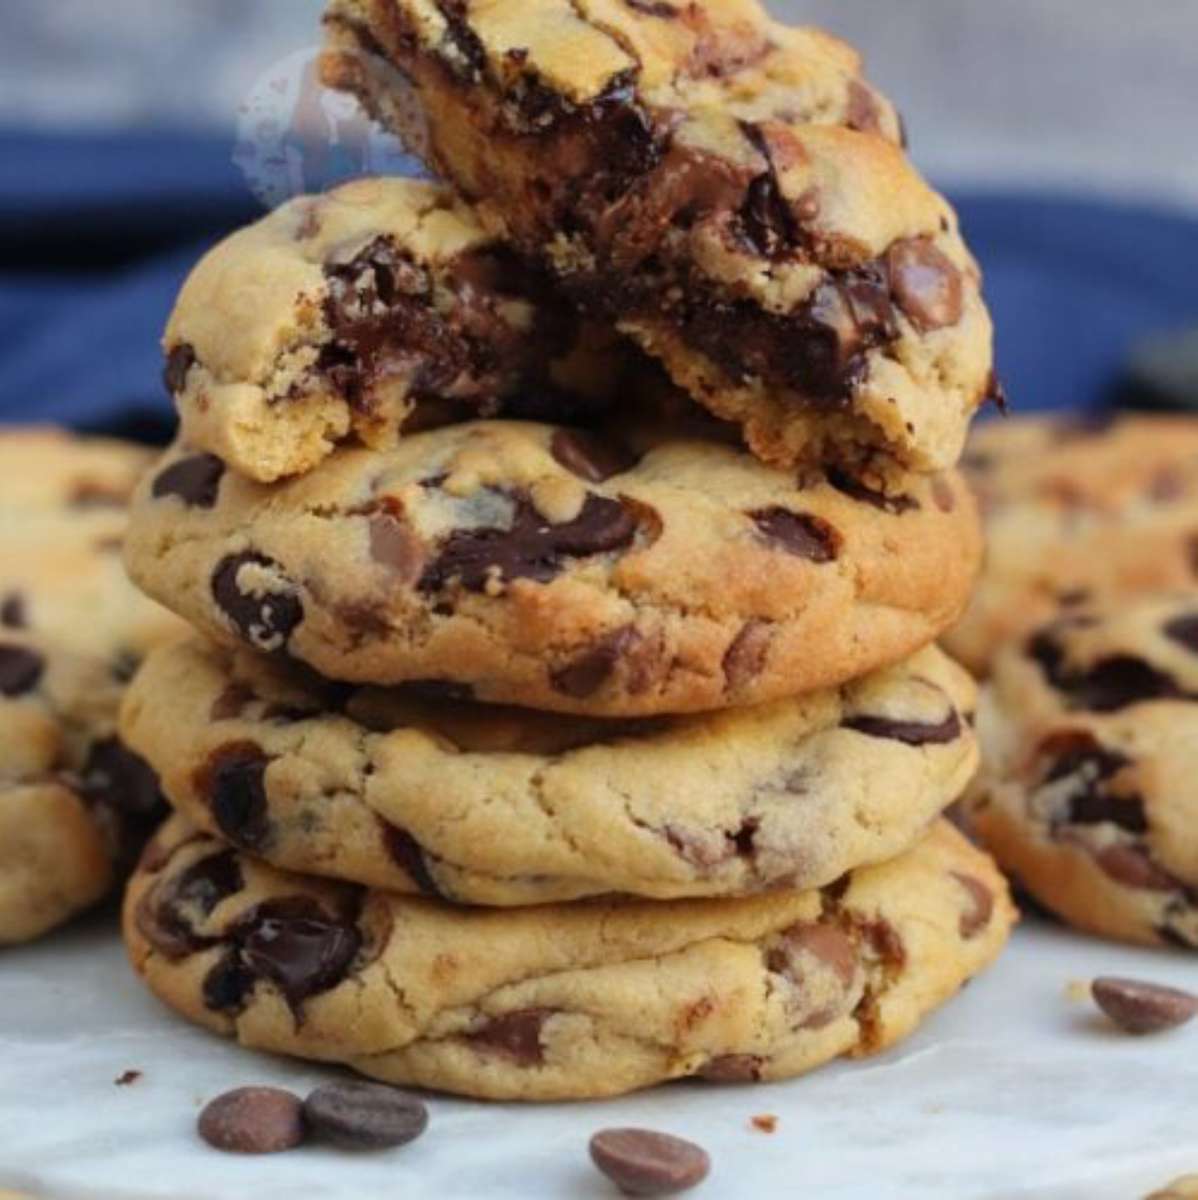 NYC Chocolate Chip Cookies! ❤️❤️❤️❤️ Online-Puzzle